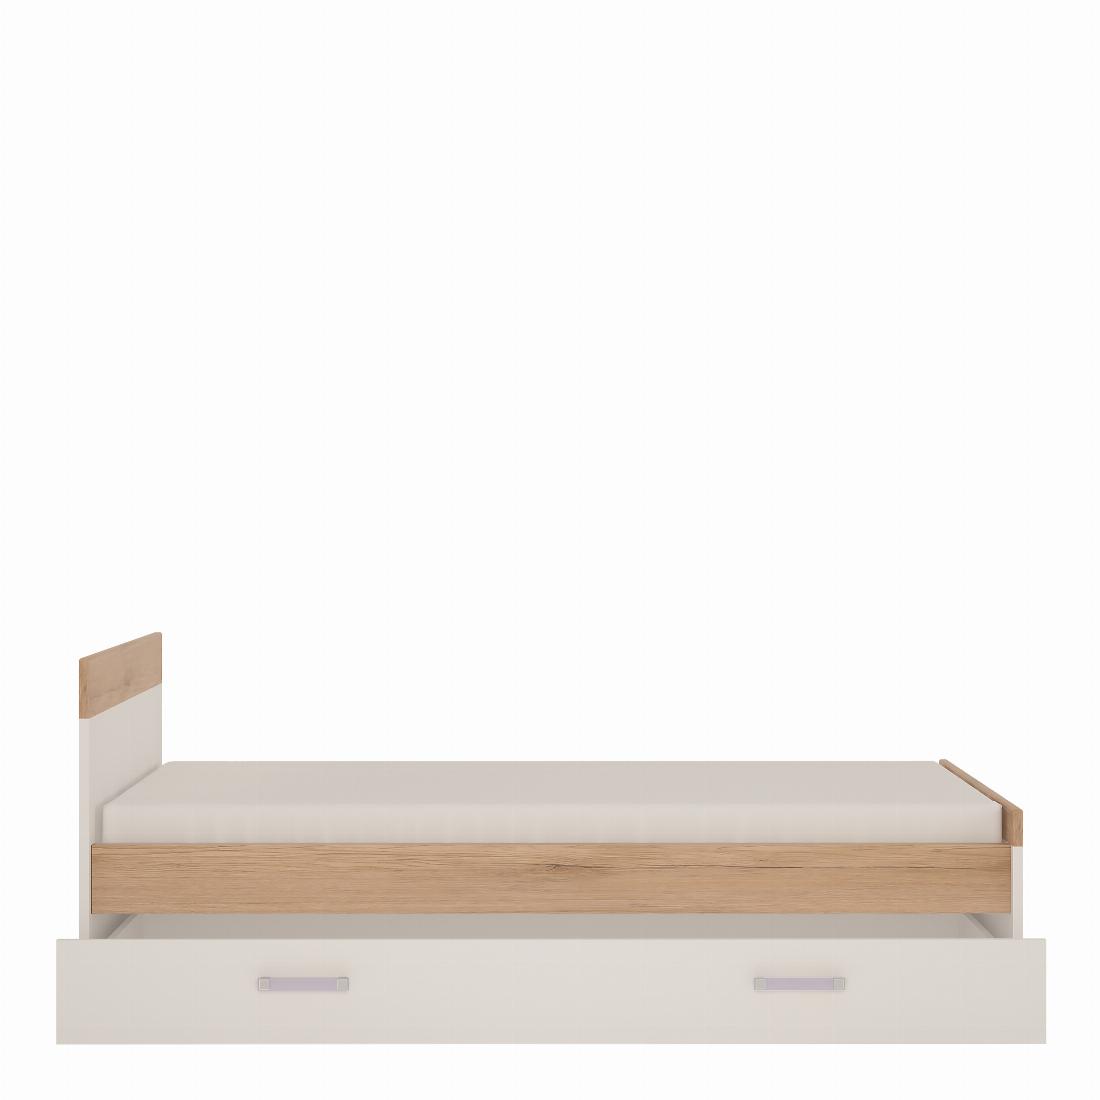 4Kids Single Bed with under Drawer